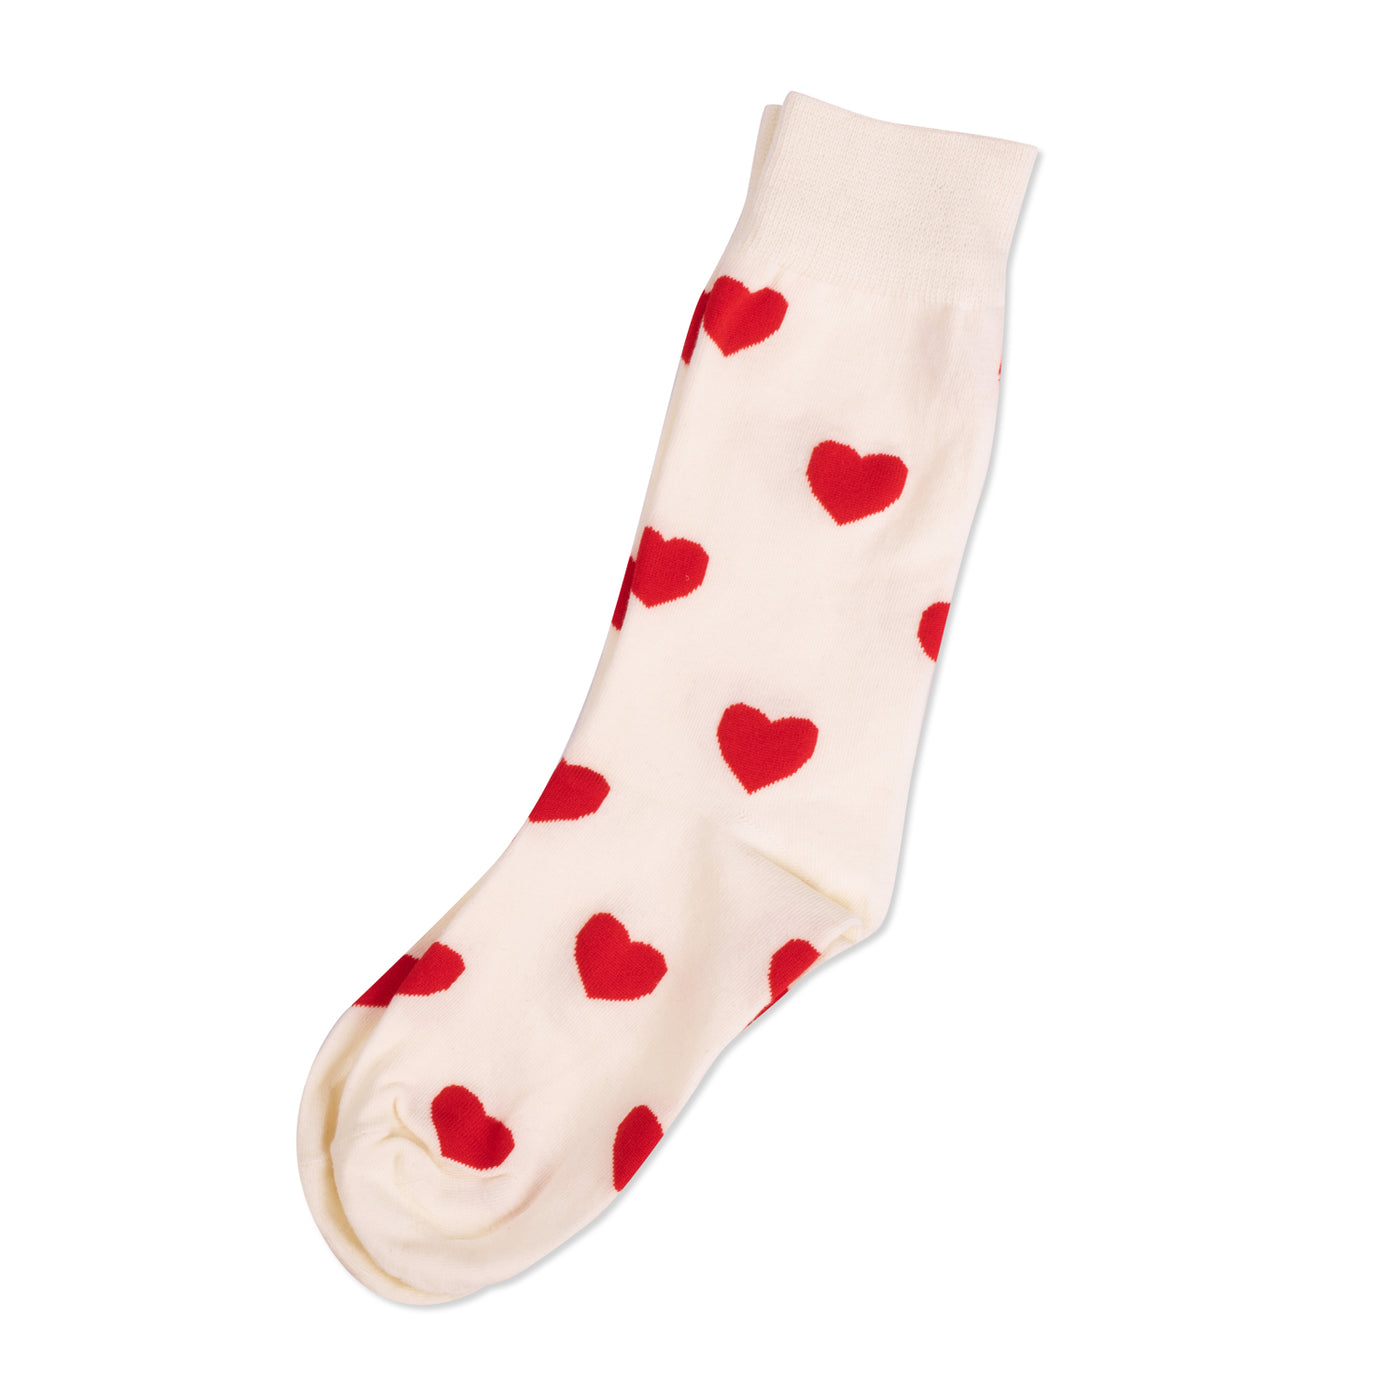 Valentines Socks for Women - Set of two pairs per set!